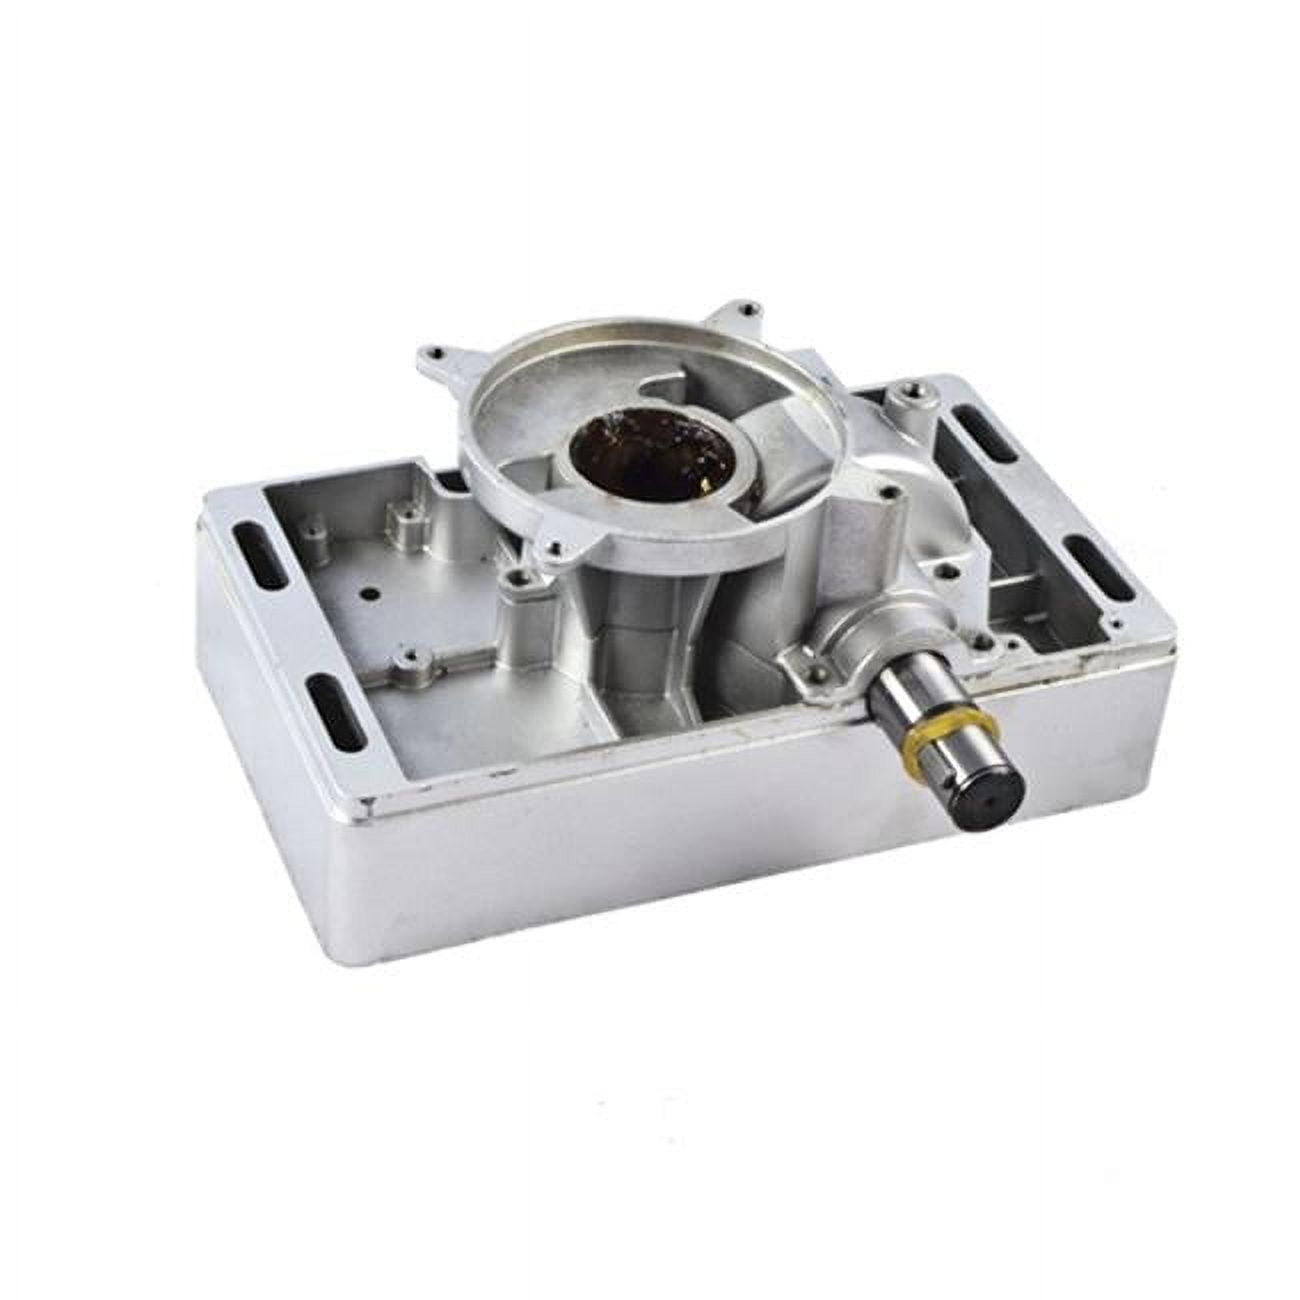 Picture of Aleko CLUTCHAC1400-UNB Gear Box Drive Transmission Unit Clutch Assembly for AC-AR1400 Sliding Gate Opener